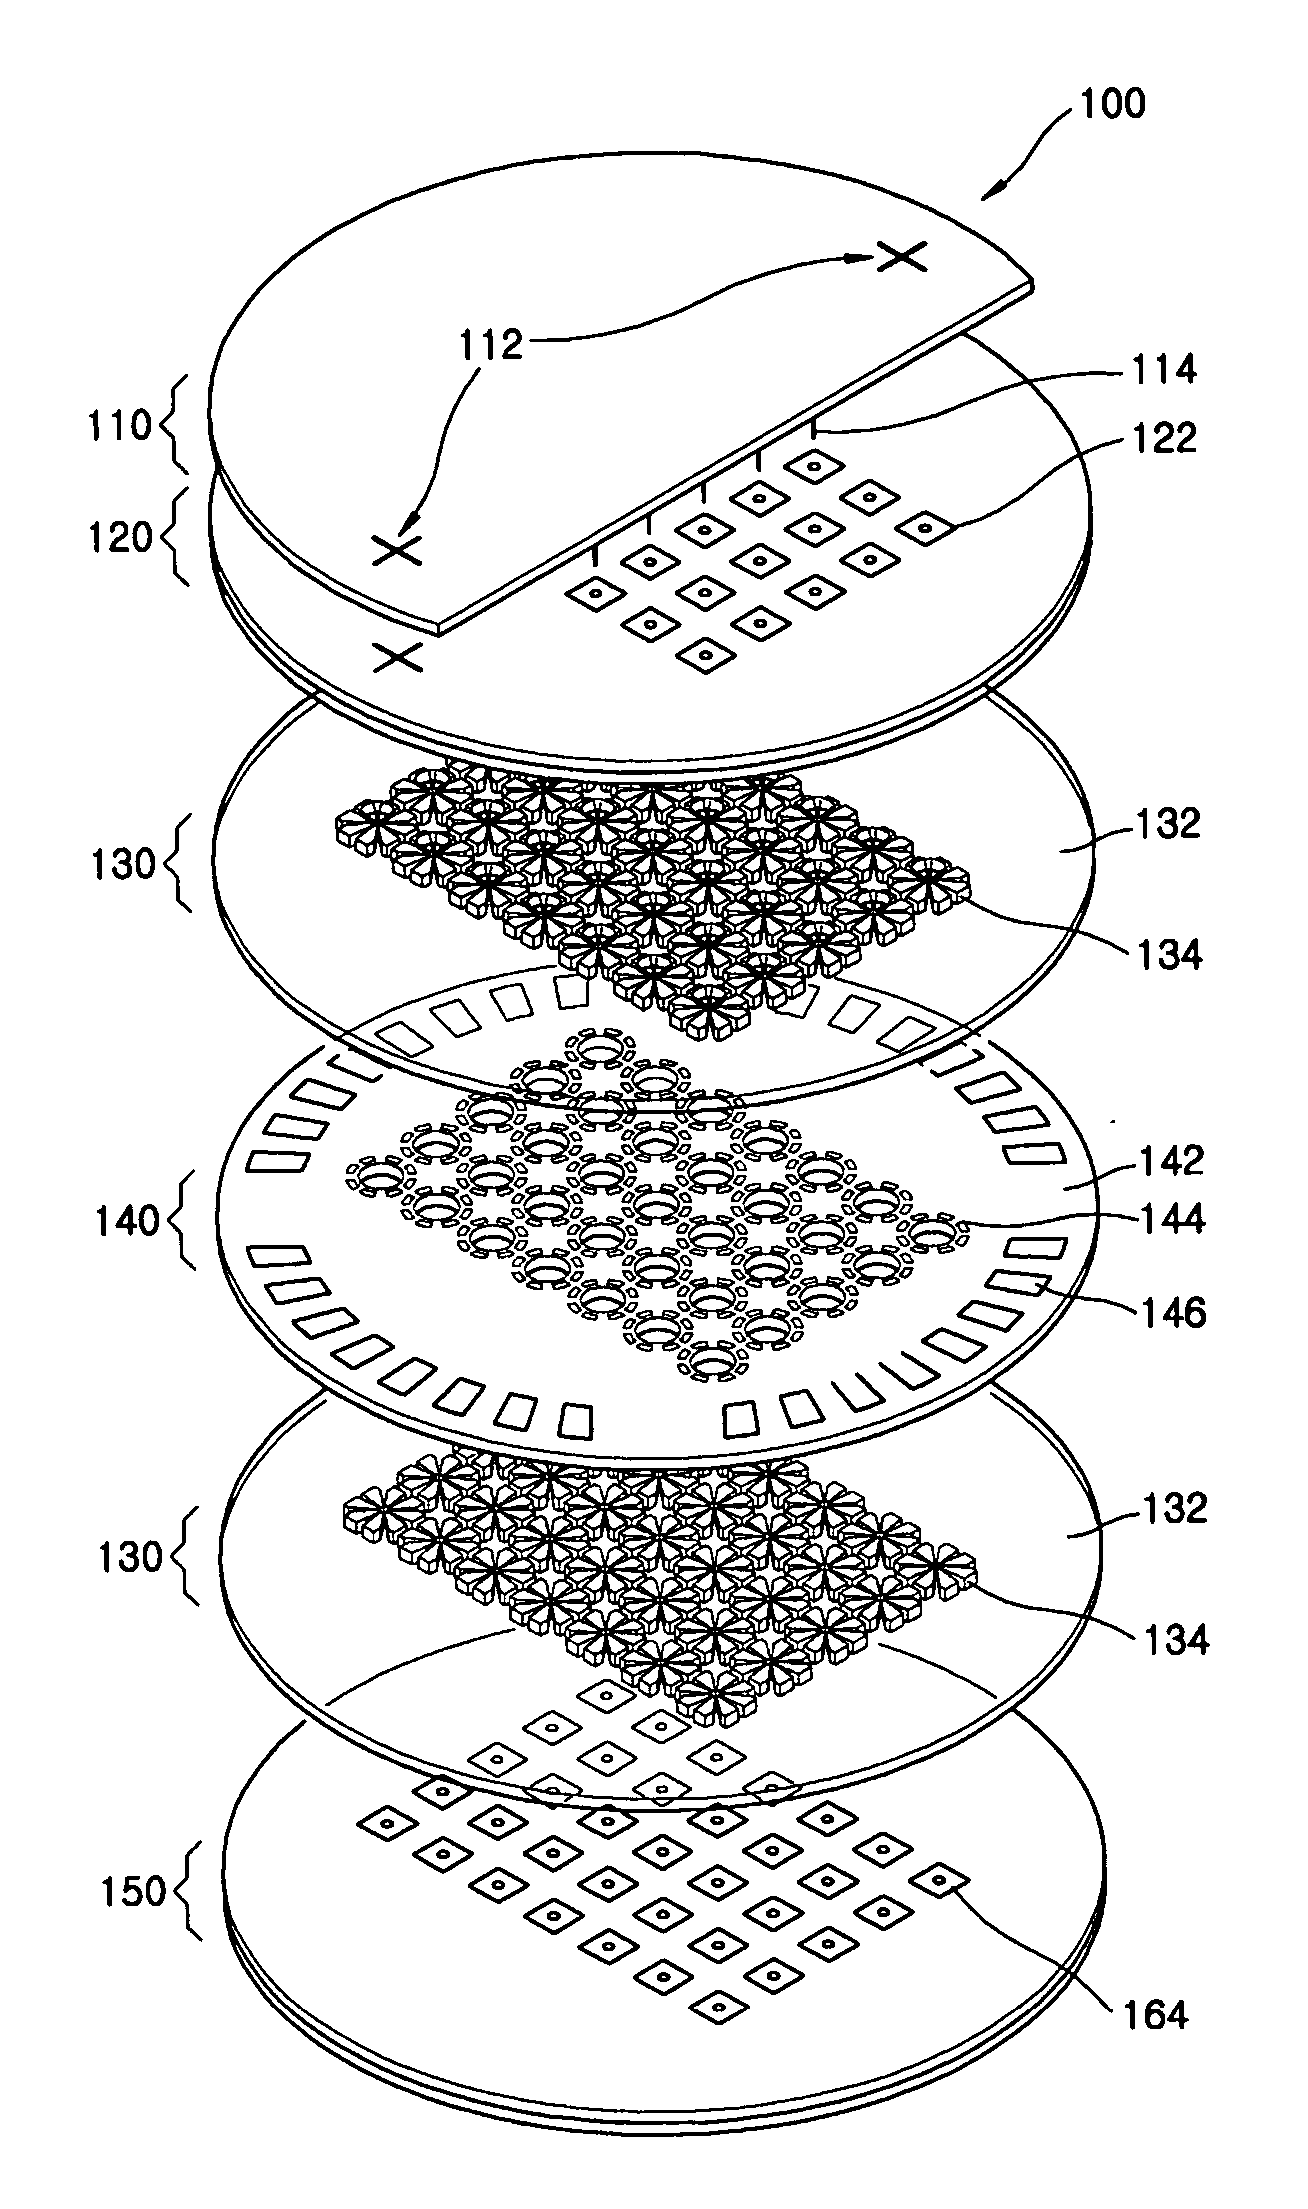 Wafer-scale microcolumn array using low temperature co-fired ceramic substrate